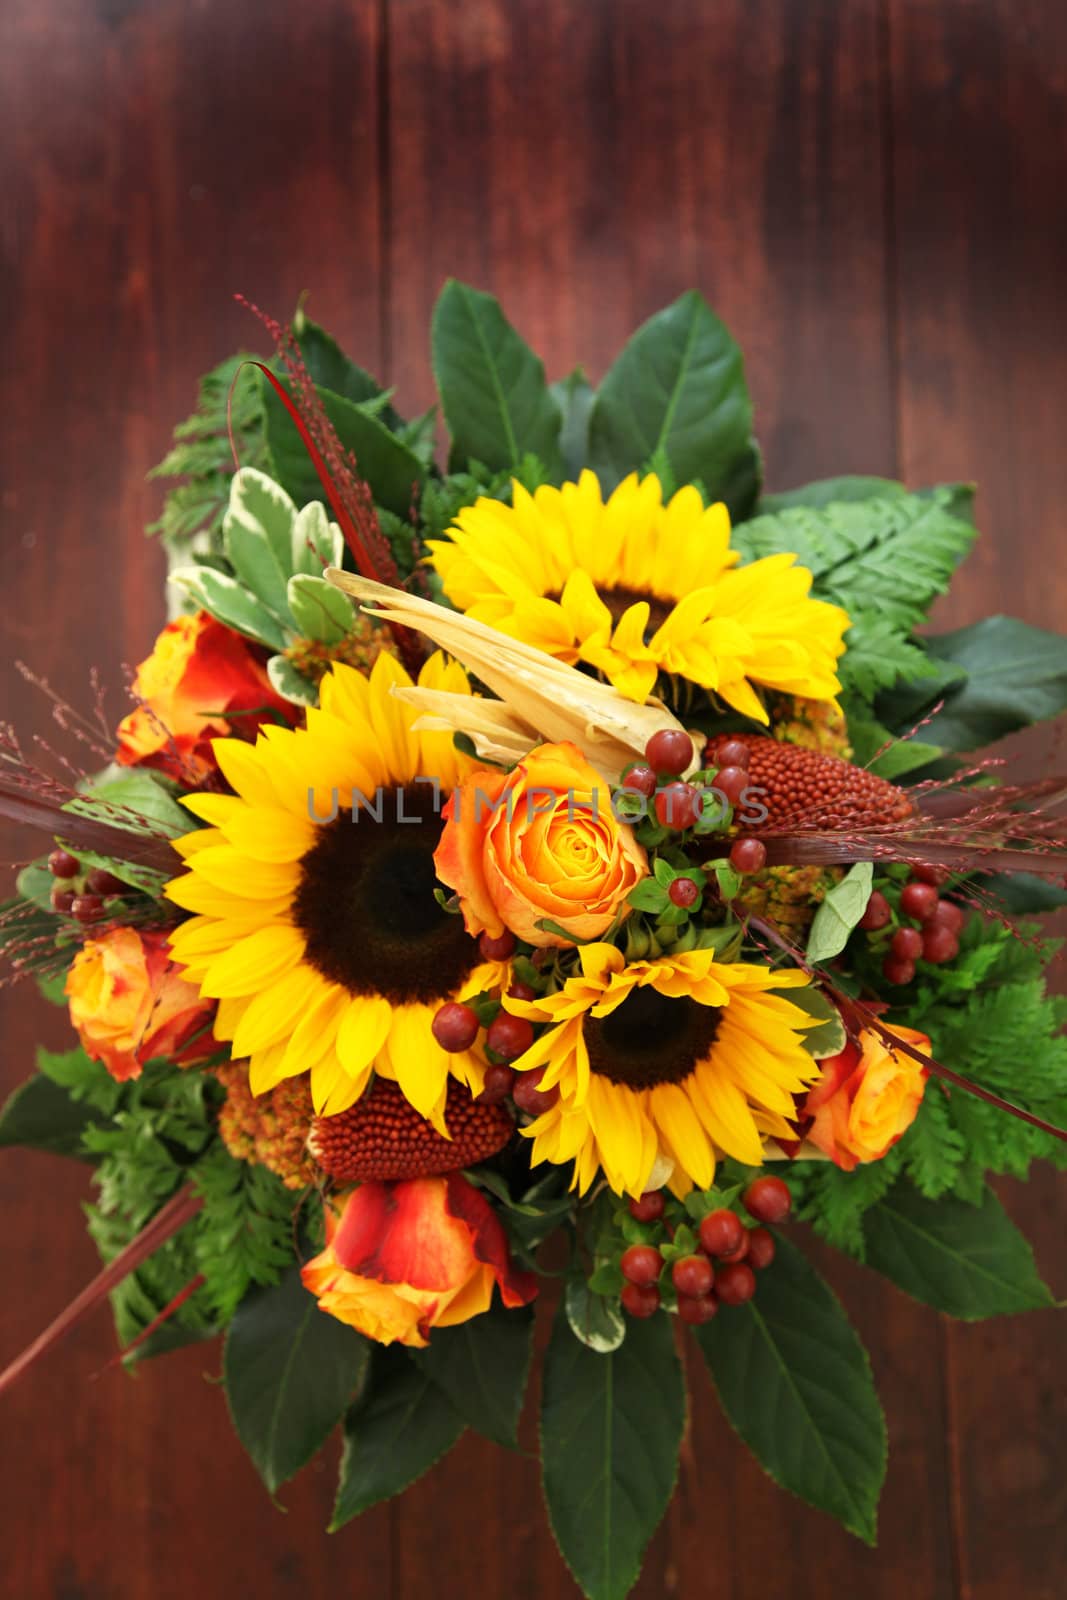 Bouquet of flowers of a large sunflower top by Farina6000